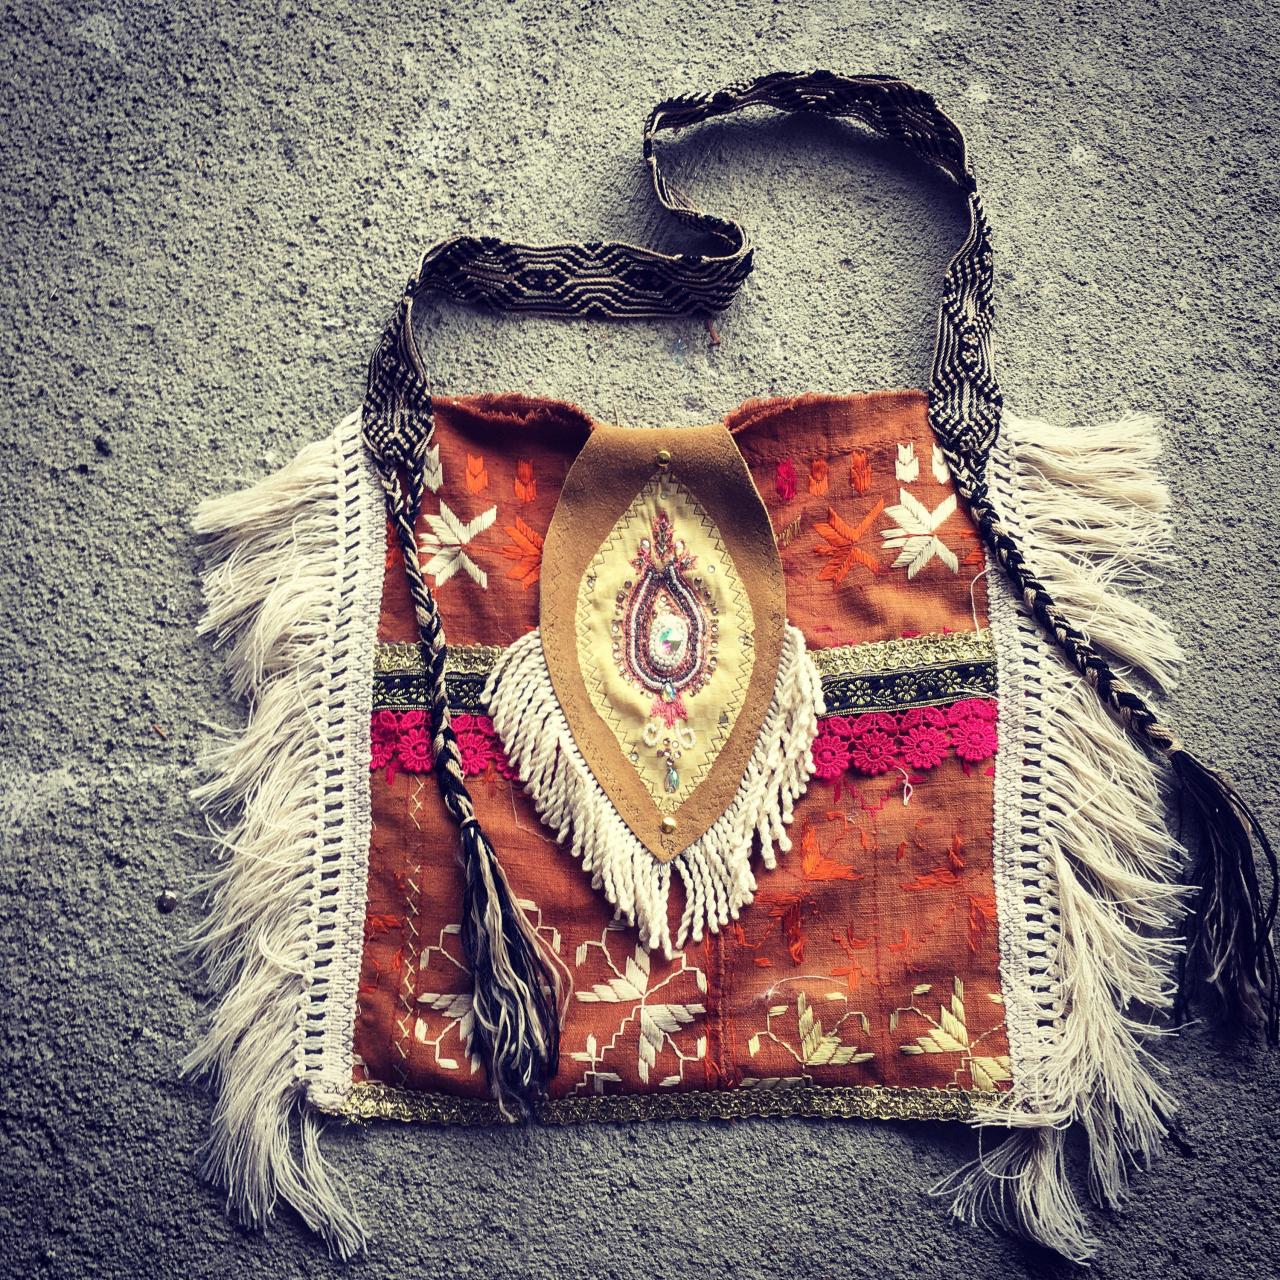 Sea Gypsy || Boho Tote || Large || Upcycled Textiles || Handmade || One Of A Kind || Gypsy || Hippie || Beautiful || Original || Unique Bag